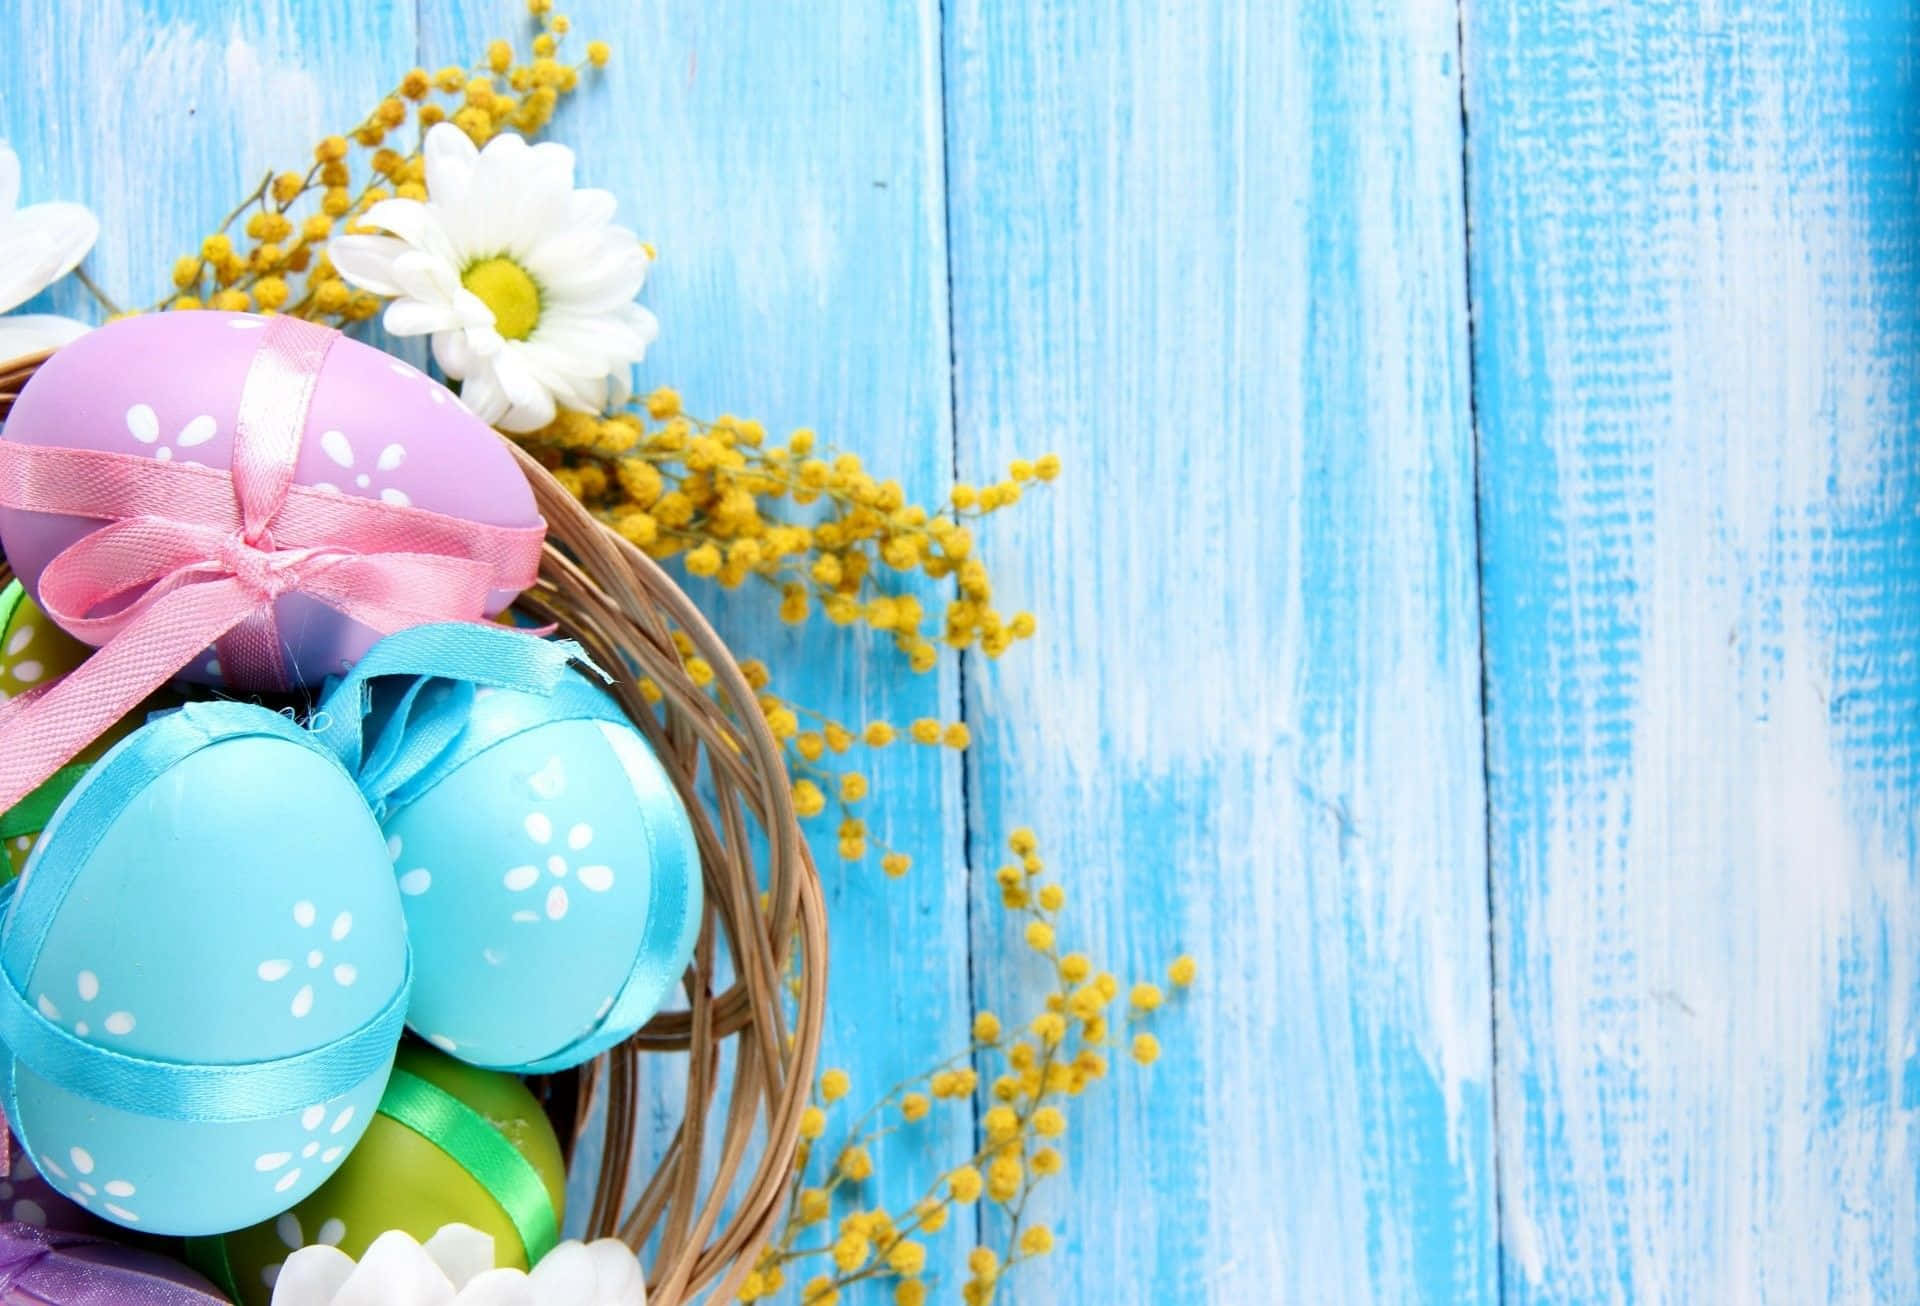 "A pastel Easter celebration full of joy and fun"